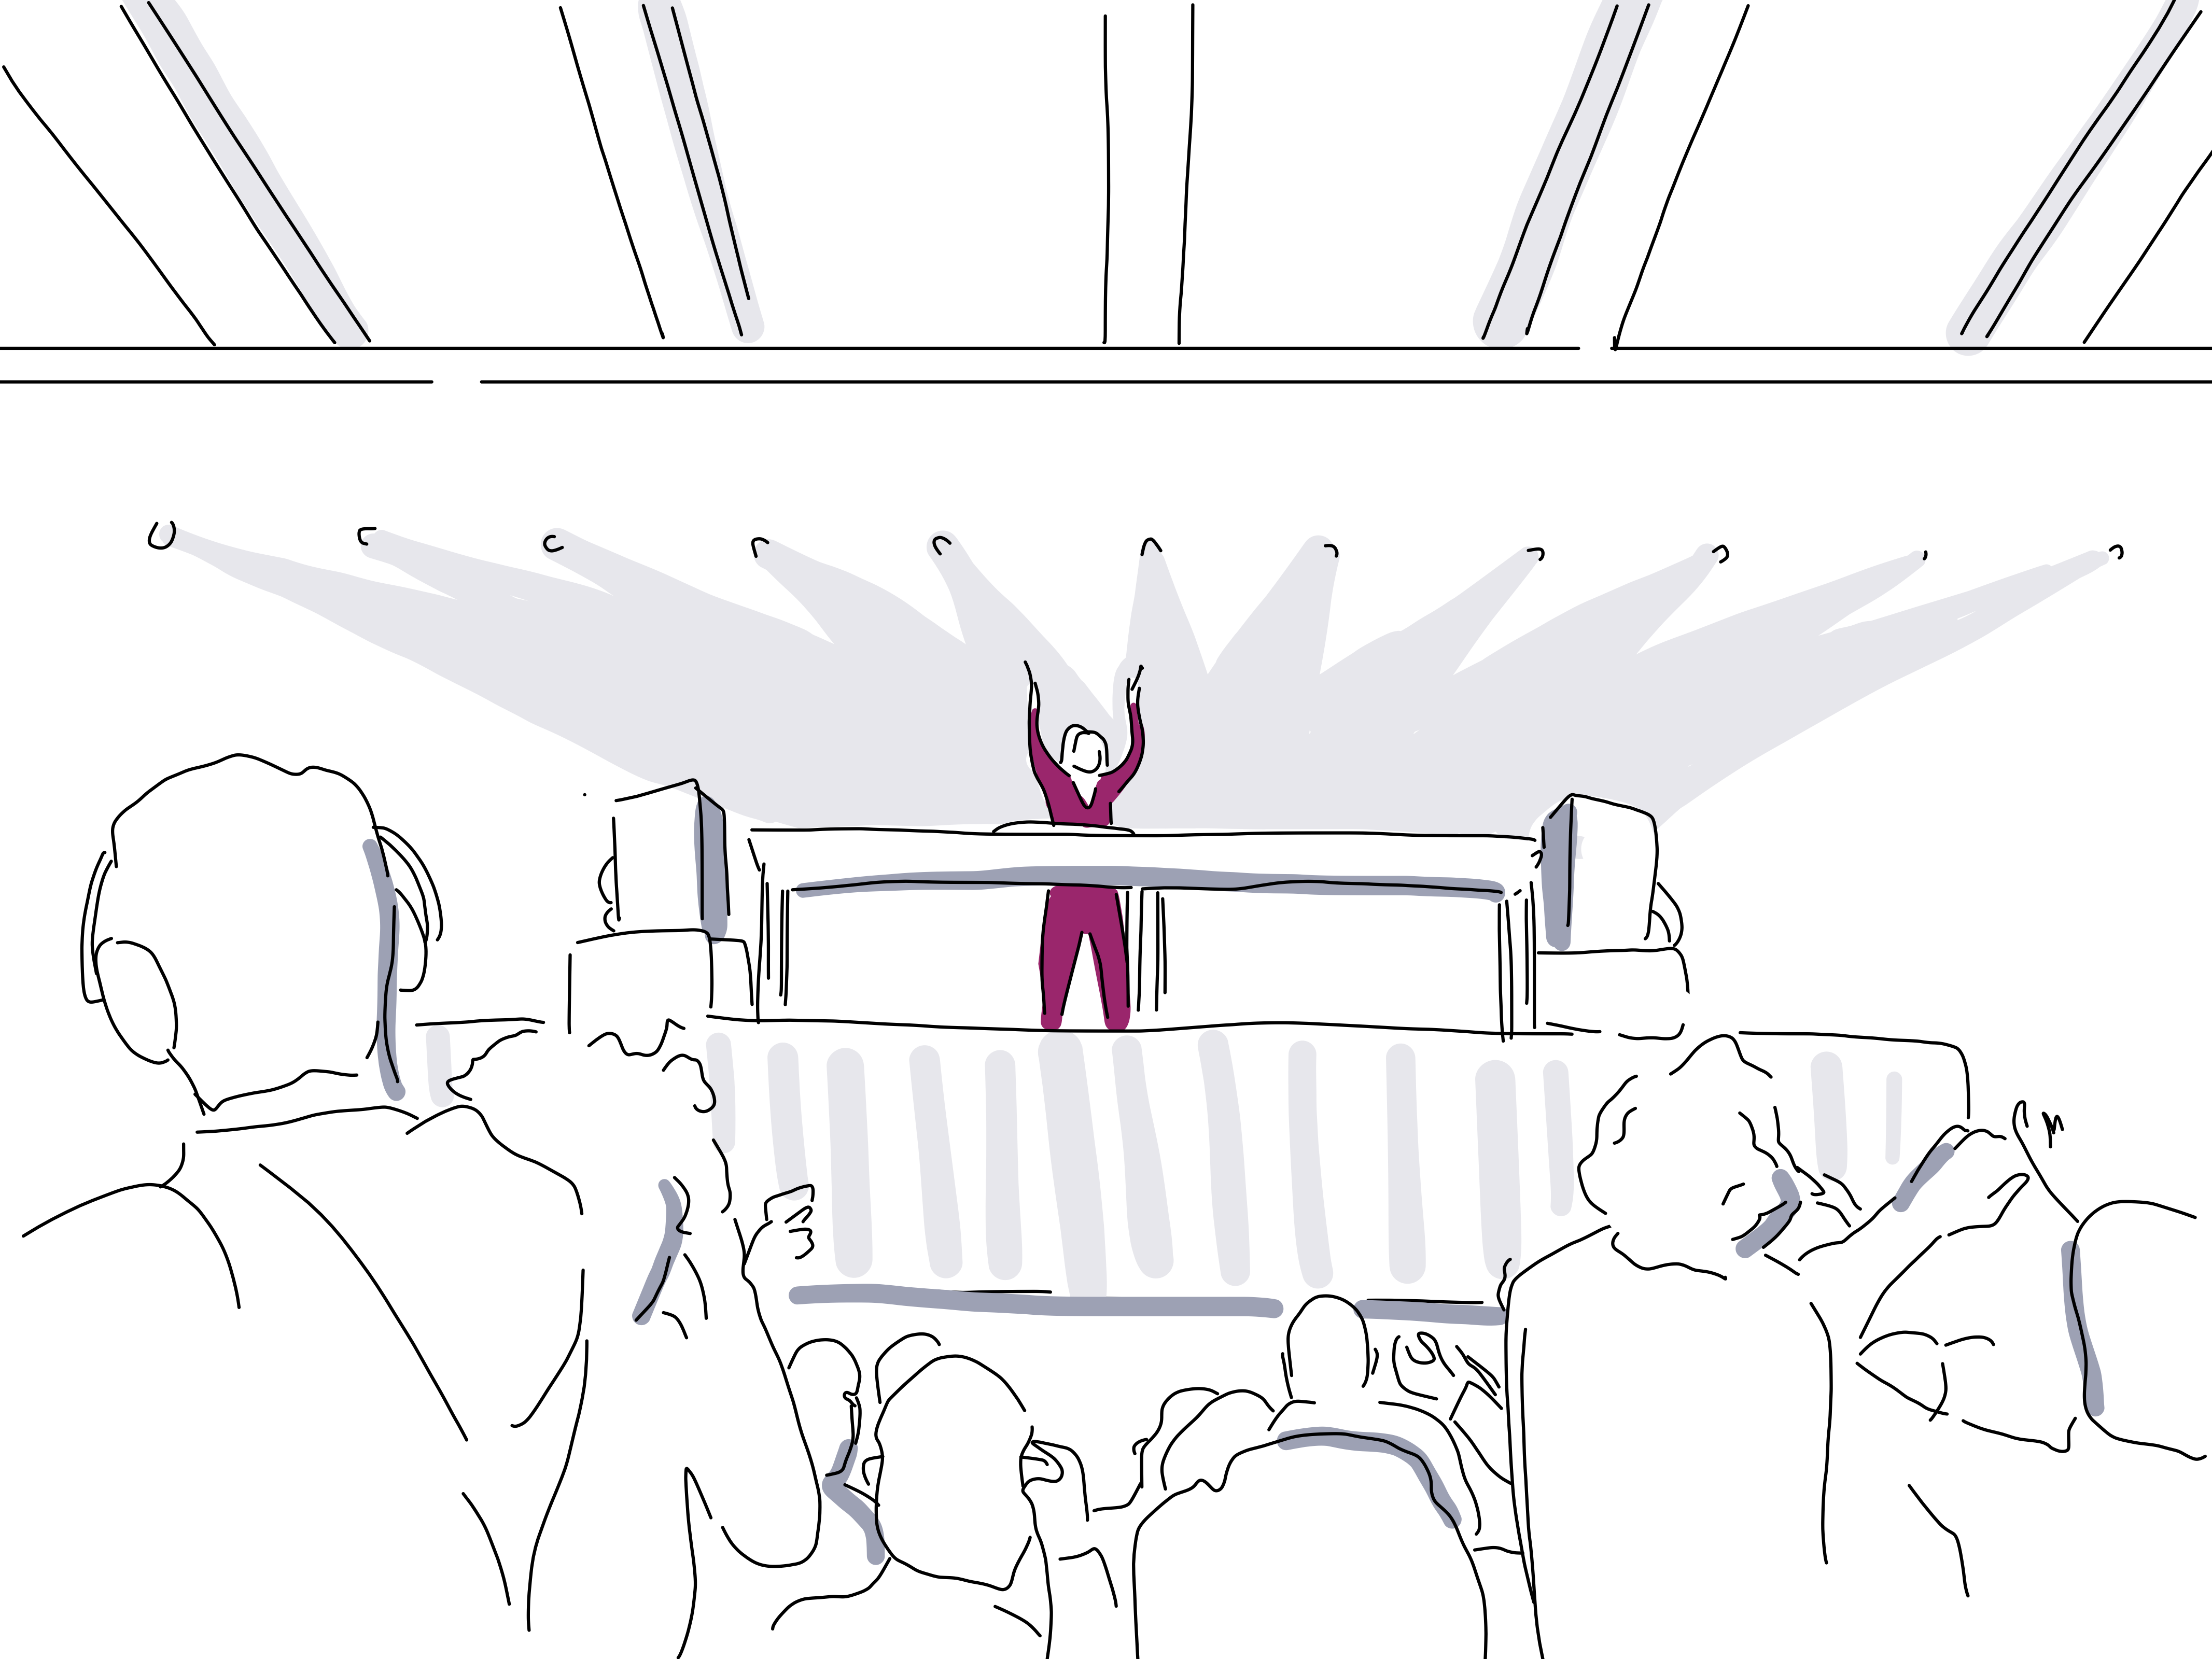 Illustration of DJ playing music on stage with audience cheering